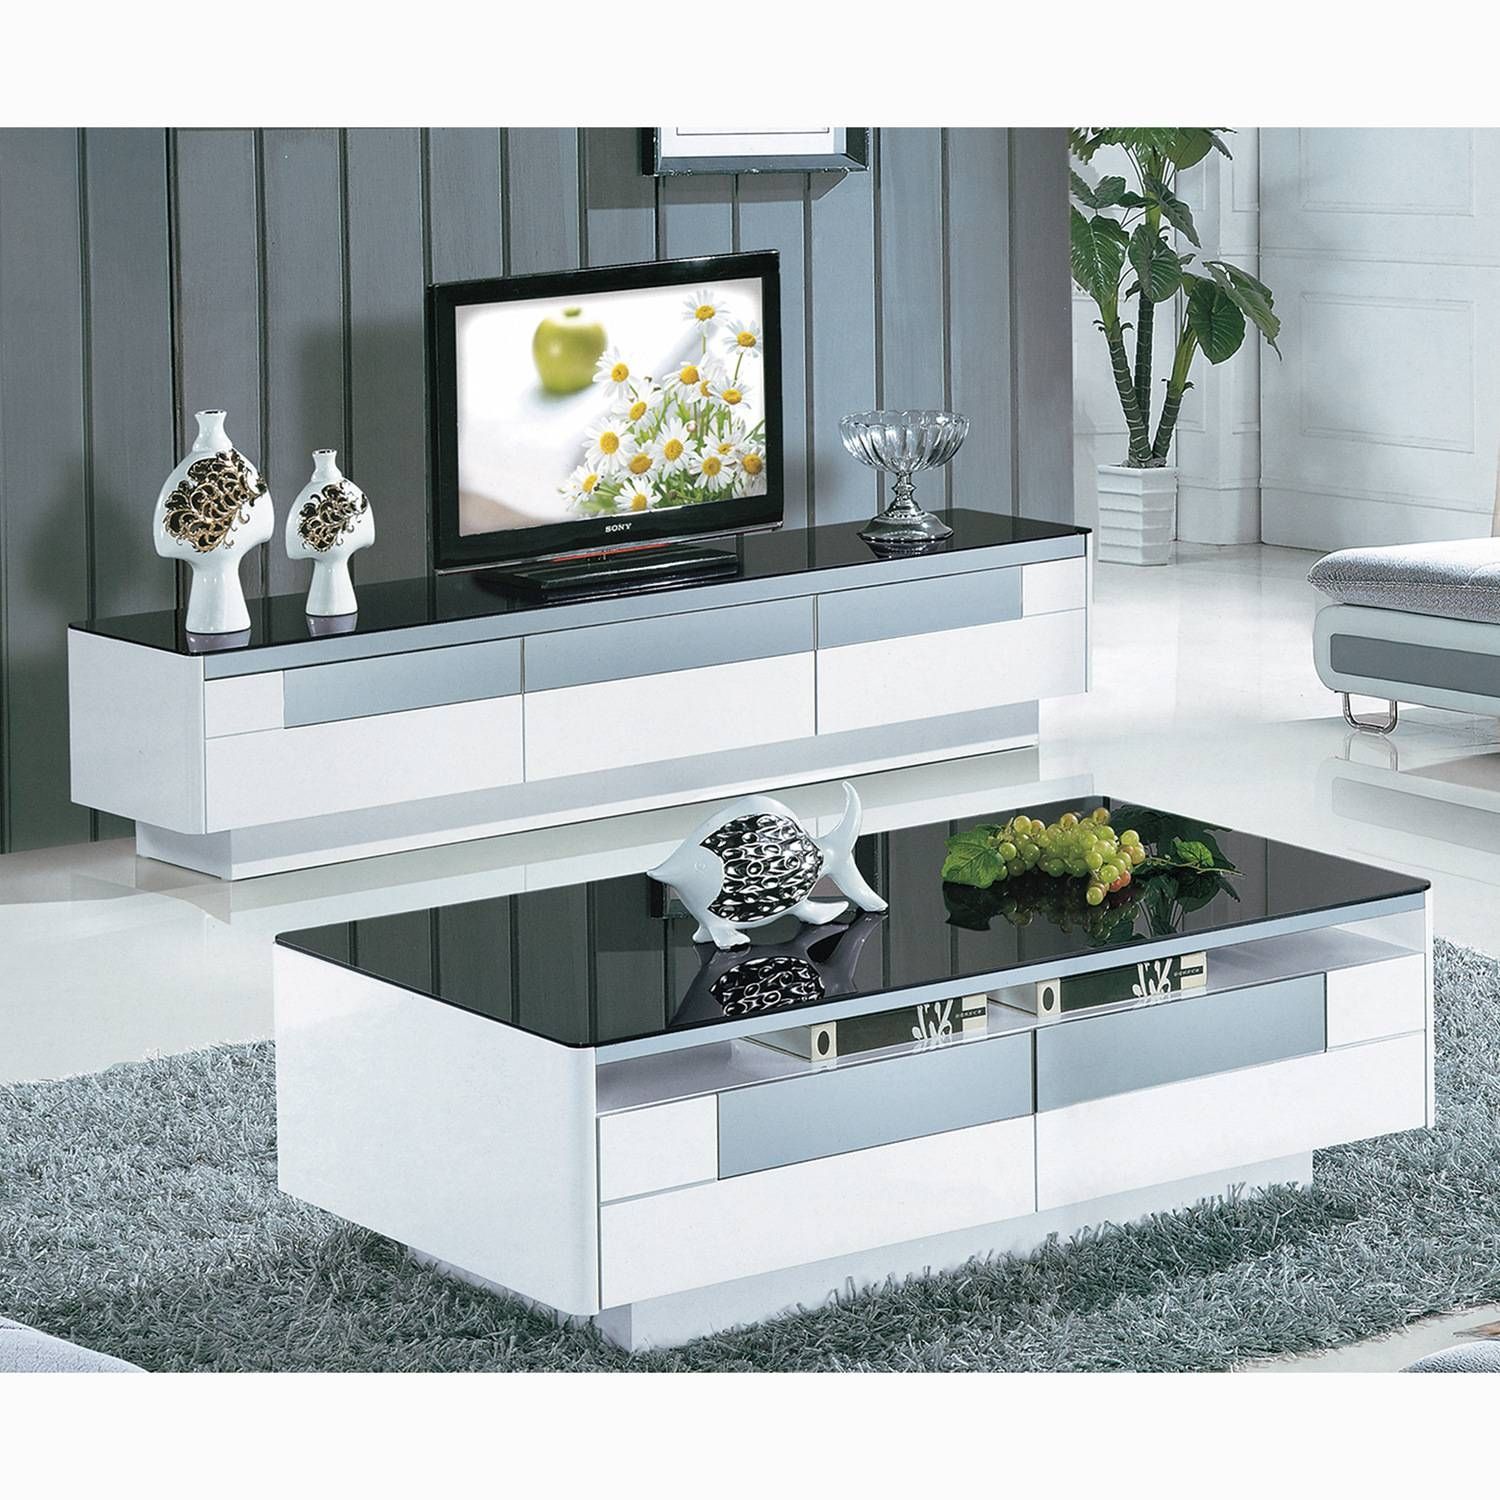 The Best Tv Cabinet and Coffee Table Sets